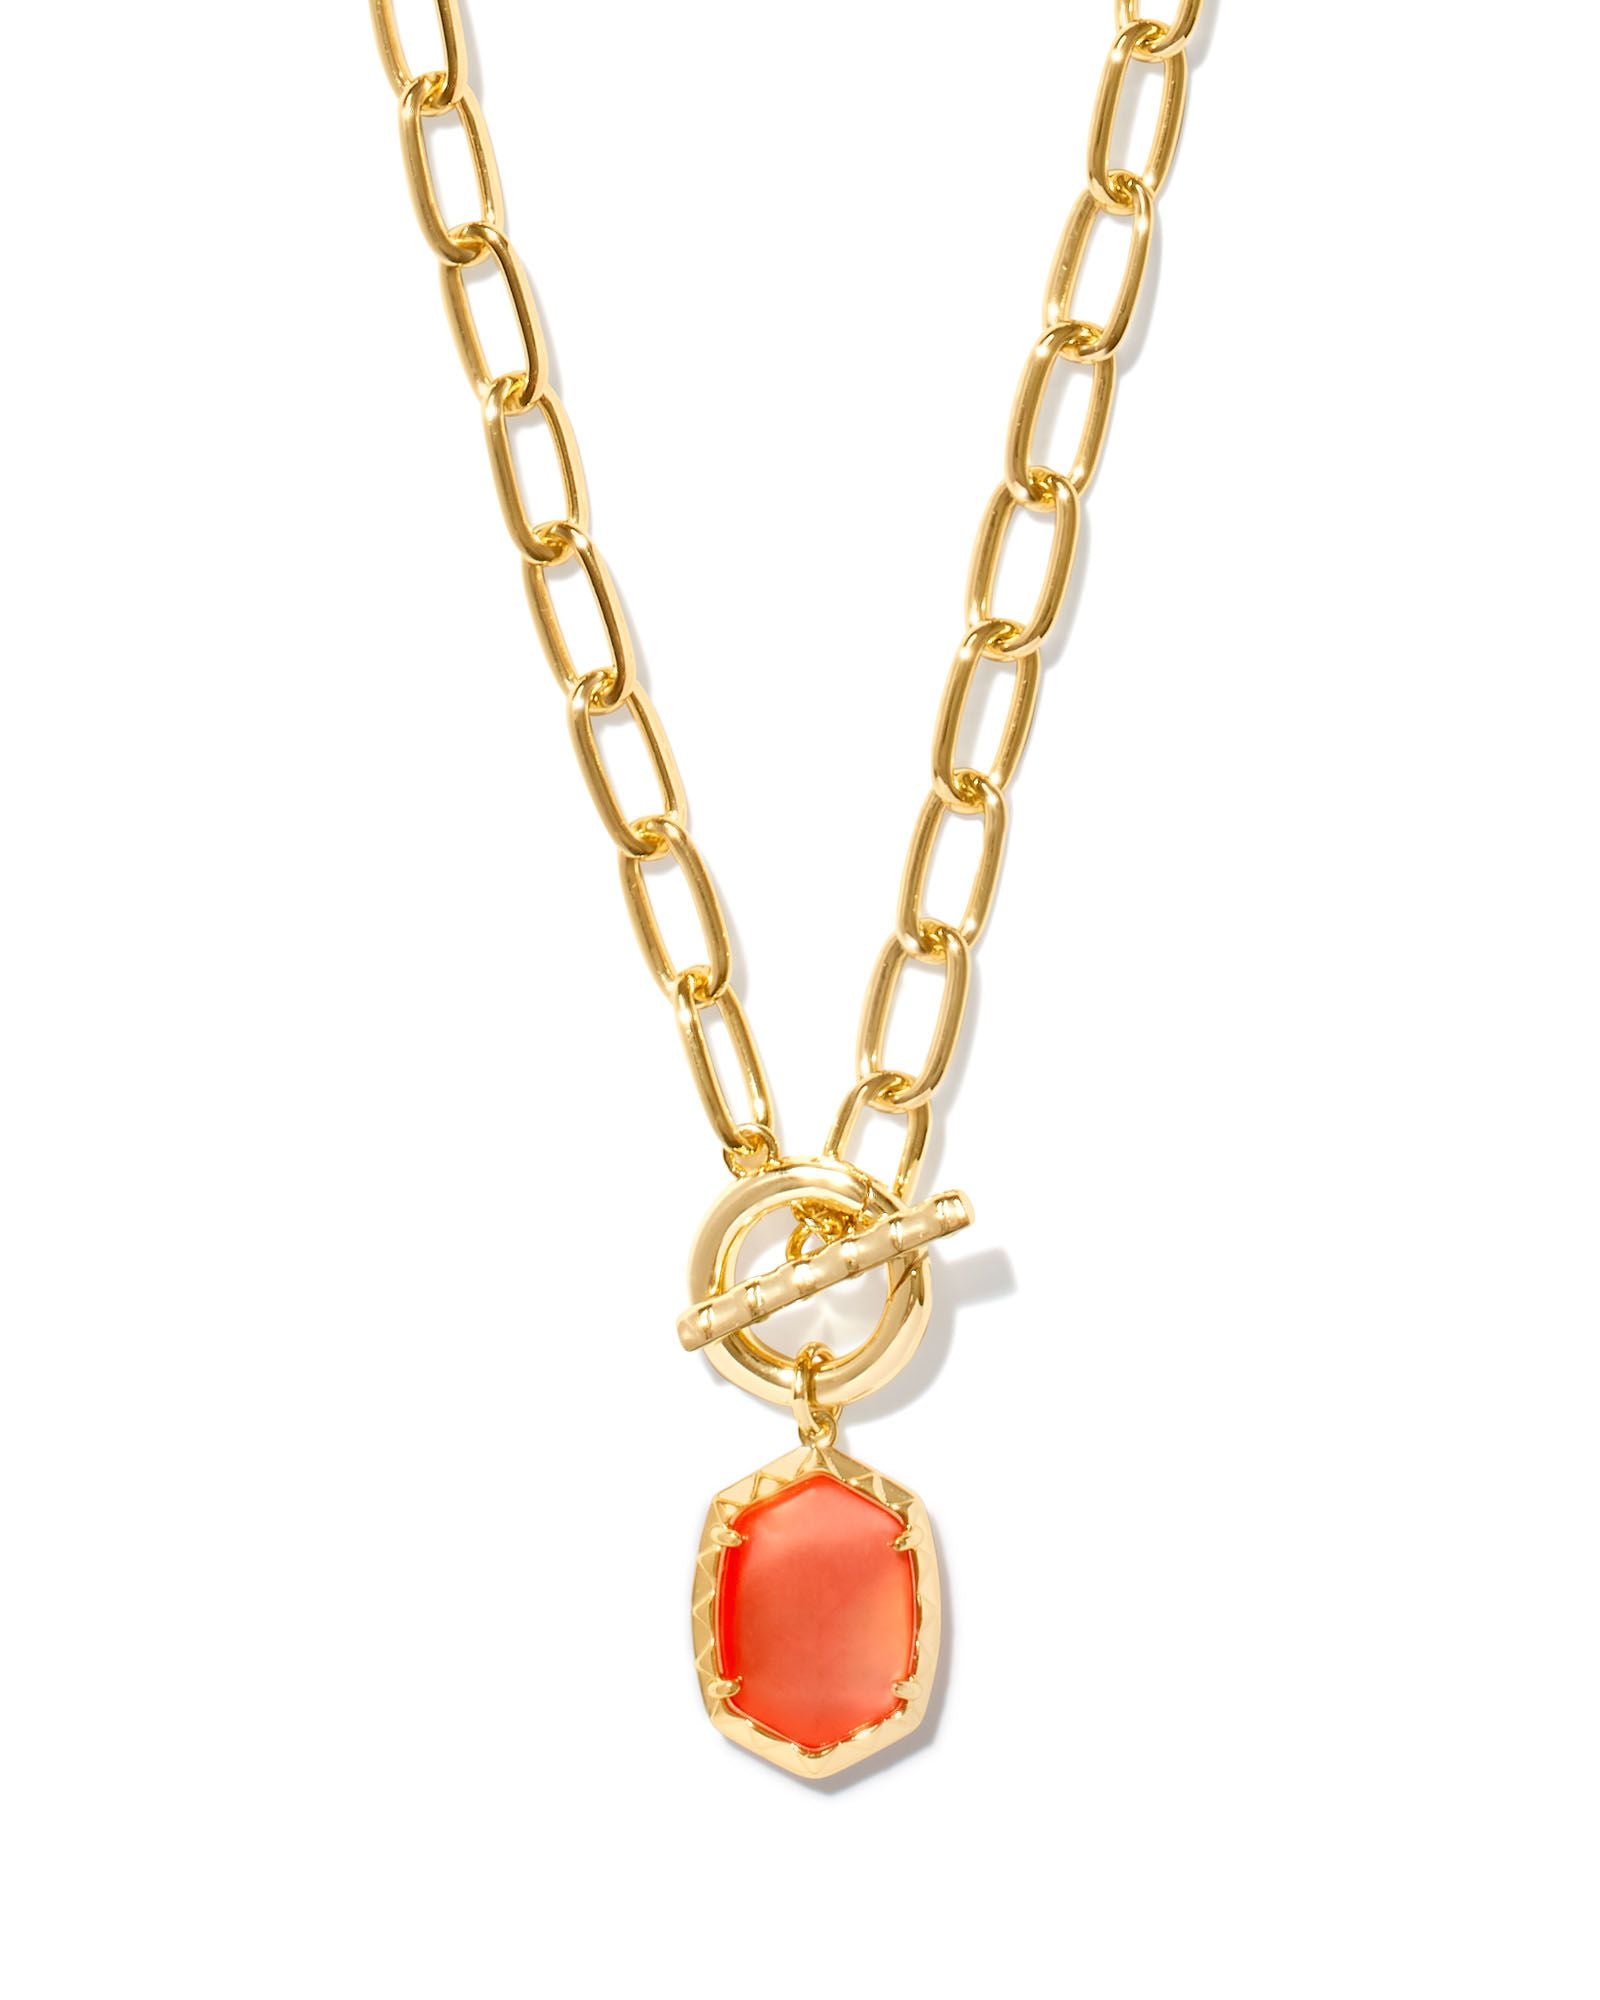 Daphne Link Chain Necklace in Gold Coral Pink Mother of Pearl